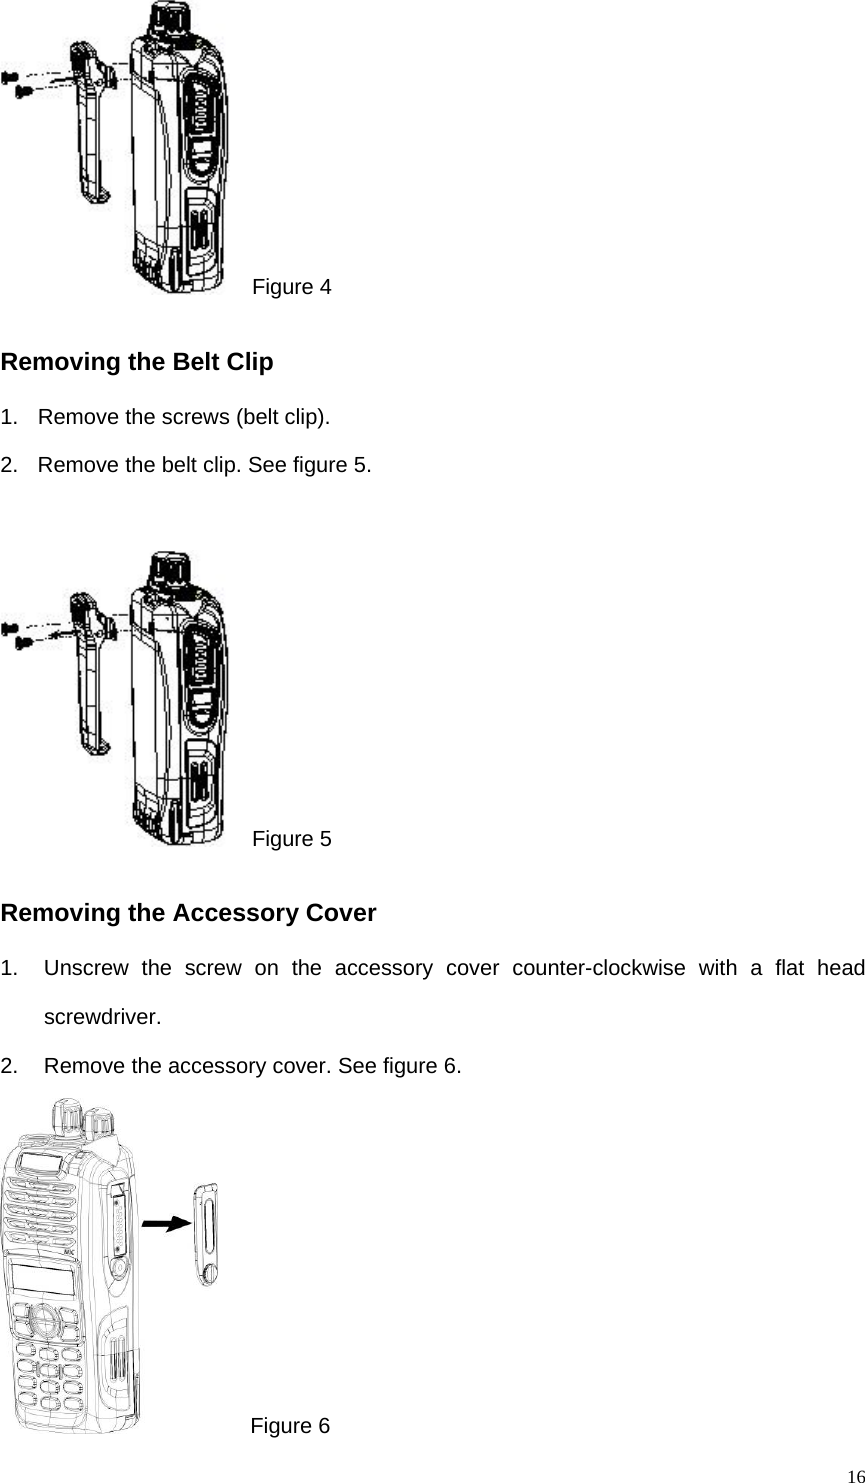   16  Figure 4 Removing the Belt Clip 1.  Remove the screws (belt clip). 2.  Remove the belt clip. See figure 5.    Figure 5 Removing the Accessory Cover   1.  Unscrew the screw on the accessory cover counter-clockwise with a flat head screwdriver.  2.  Remove the accessory cover. See figure 6.    Figure 6 